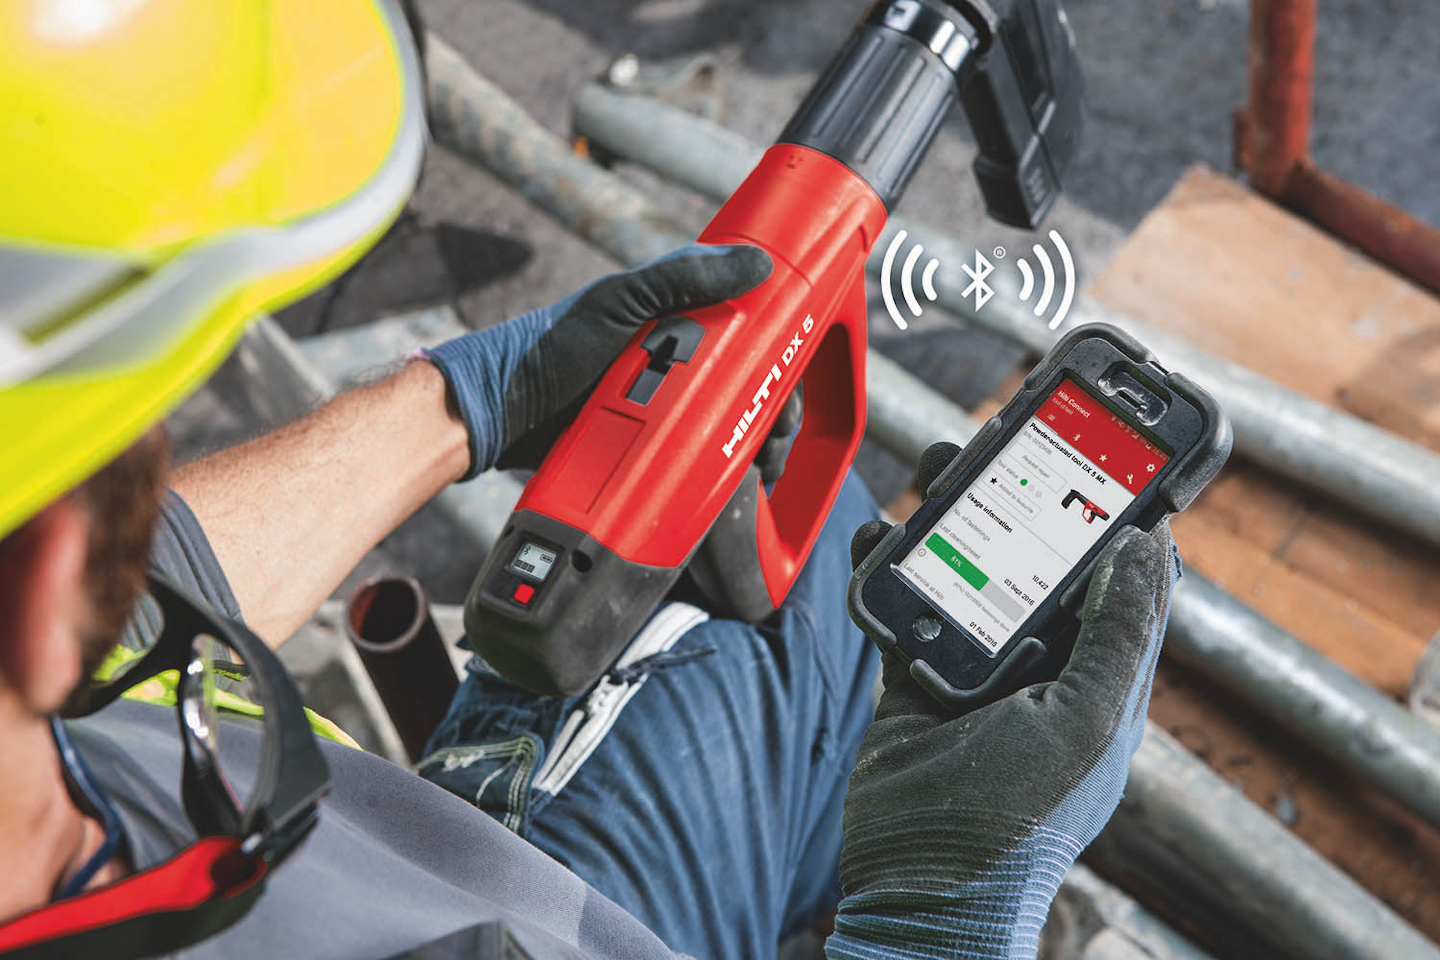 Hilti’s new DX 5, TE 60 smart tools connect to your phone for tracking use, service and more